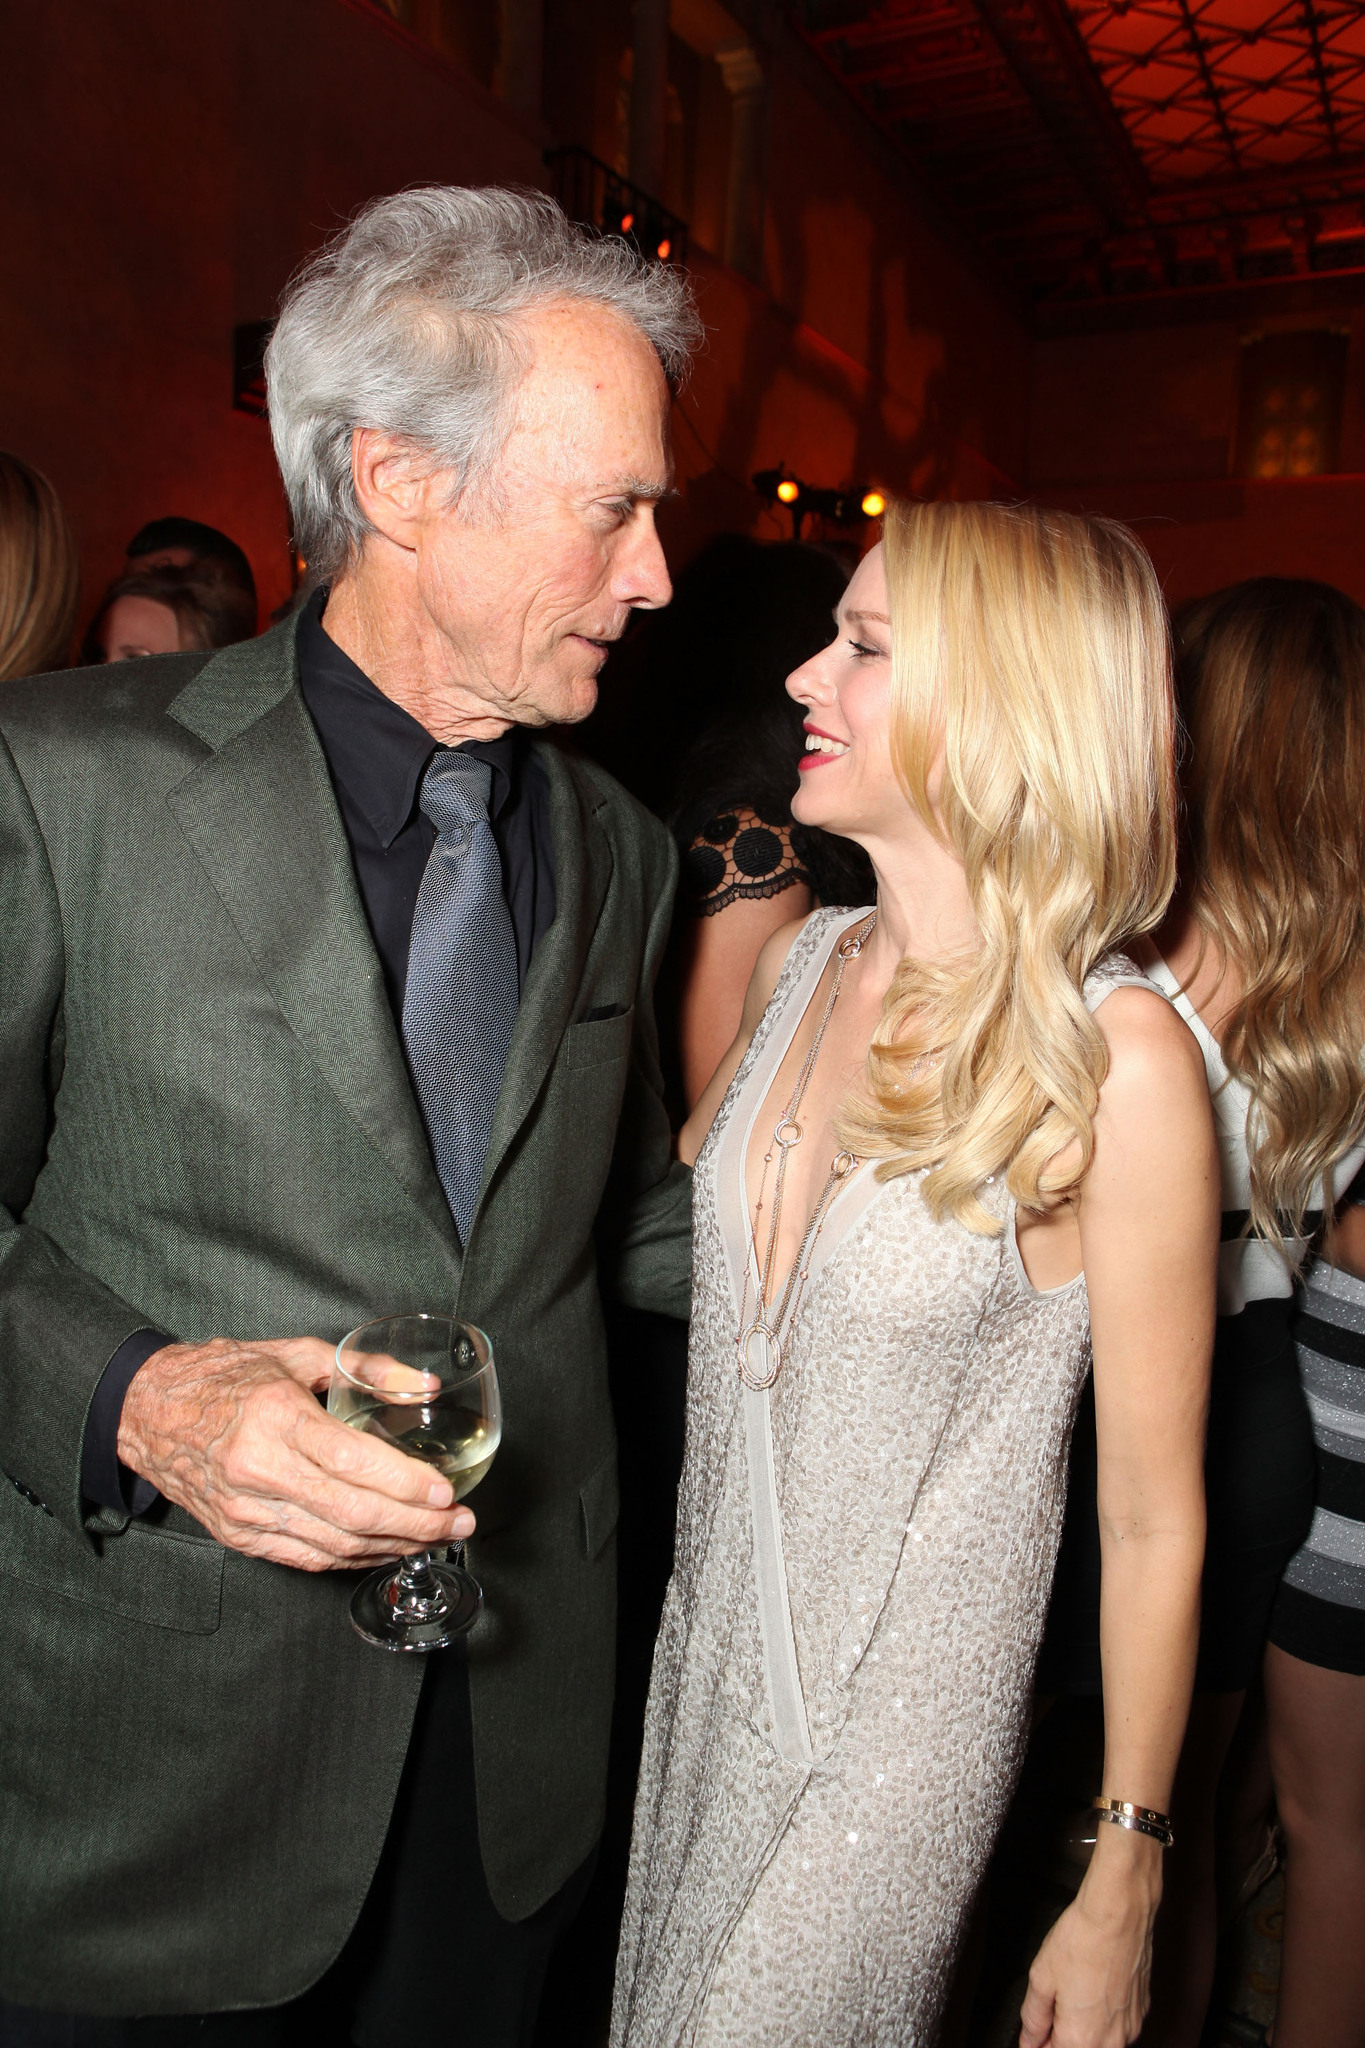 Clint Eastwood and Naomi Watts at event of J. Edgar (2011)